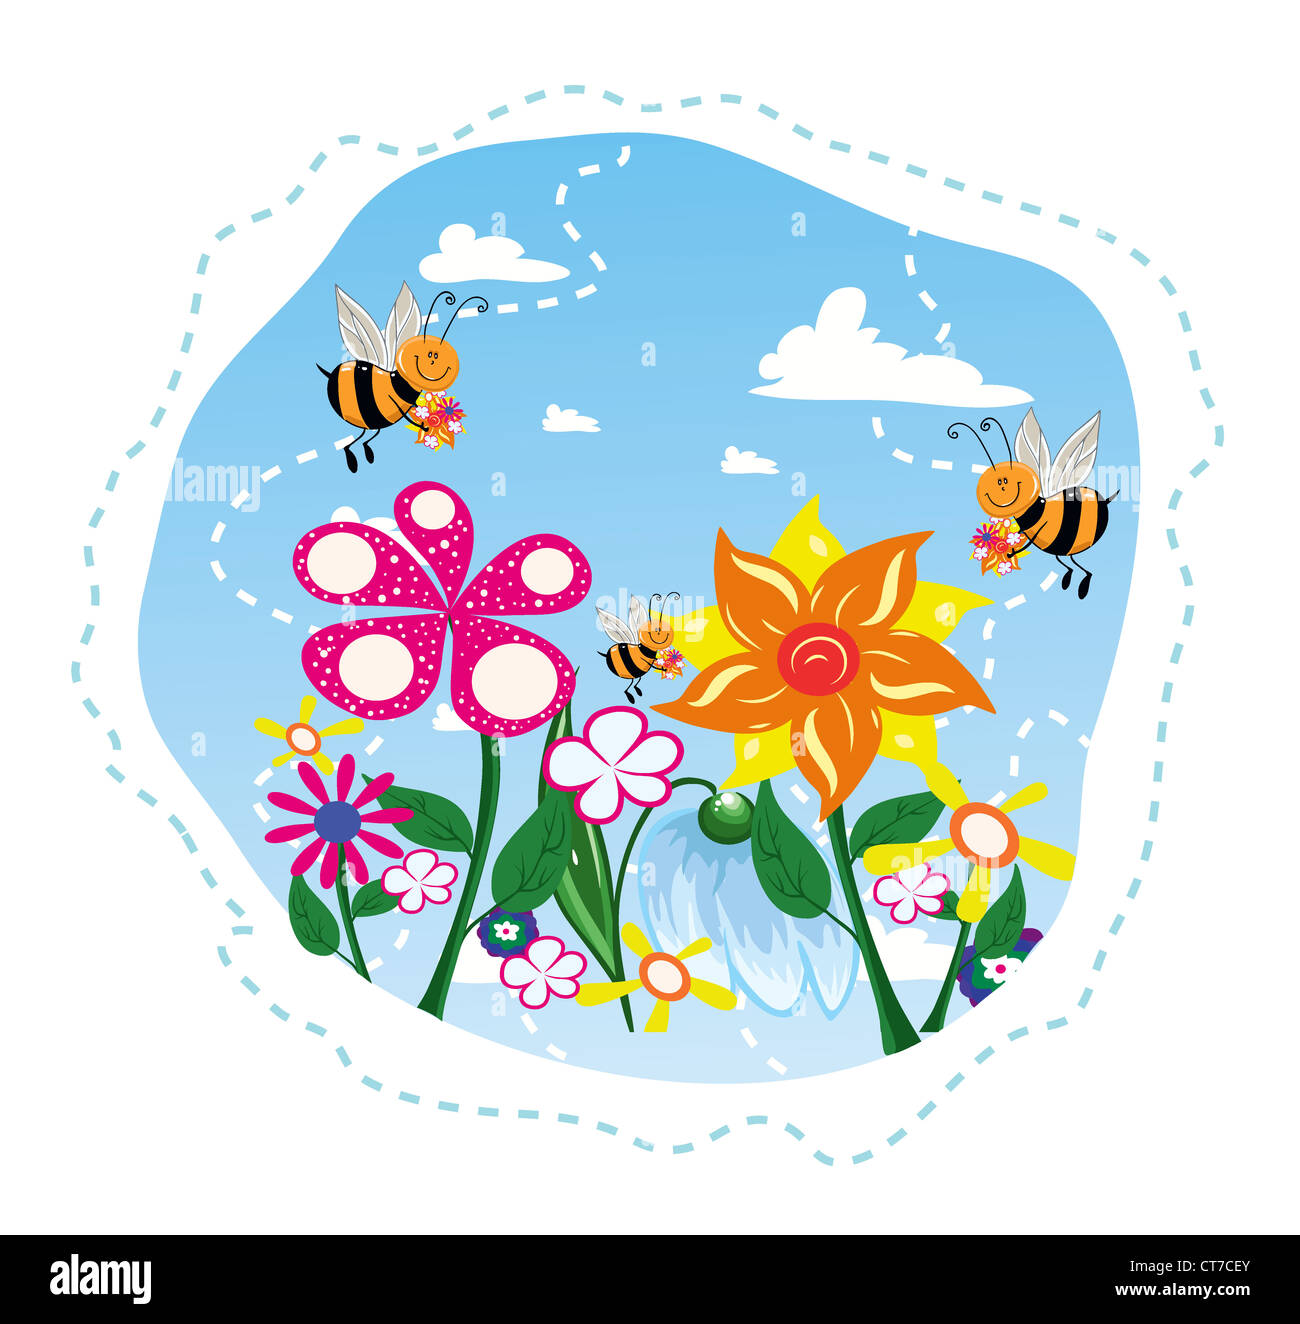 bees in flowers vector illustration Stock Photo